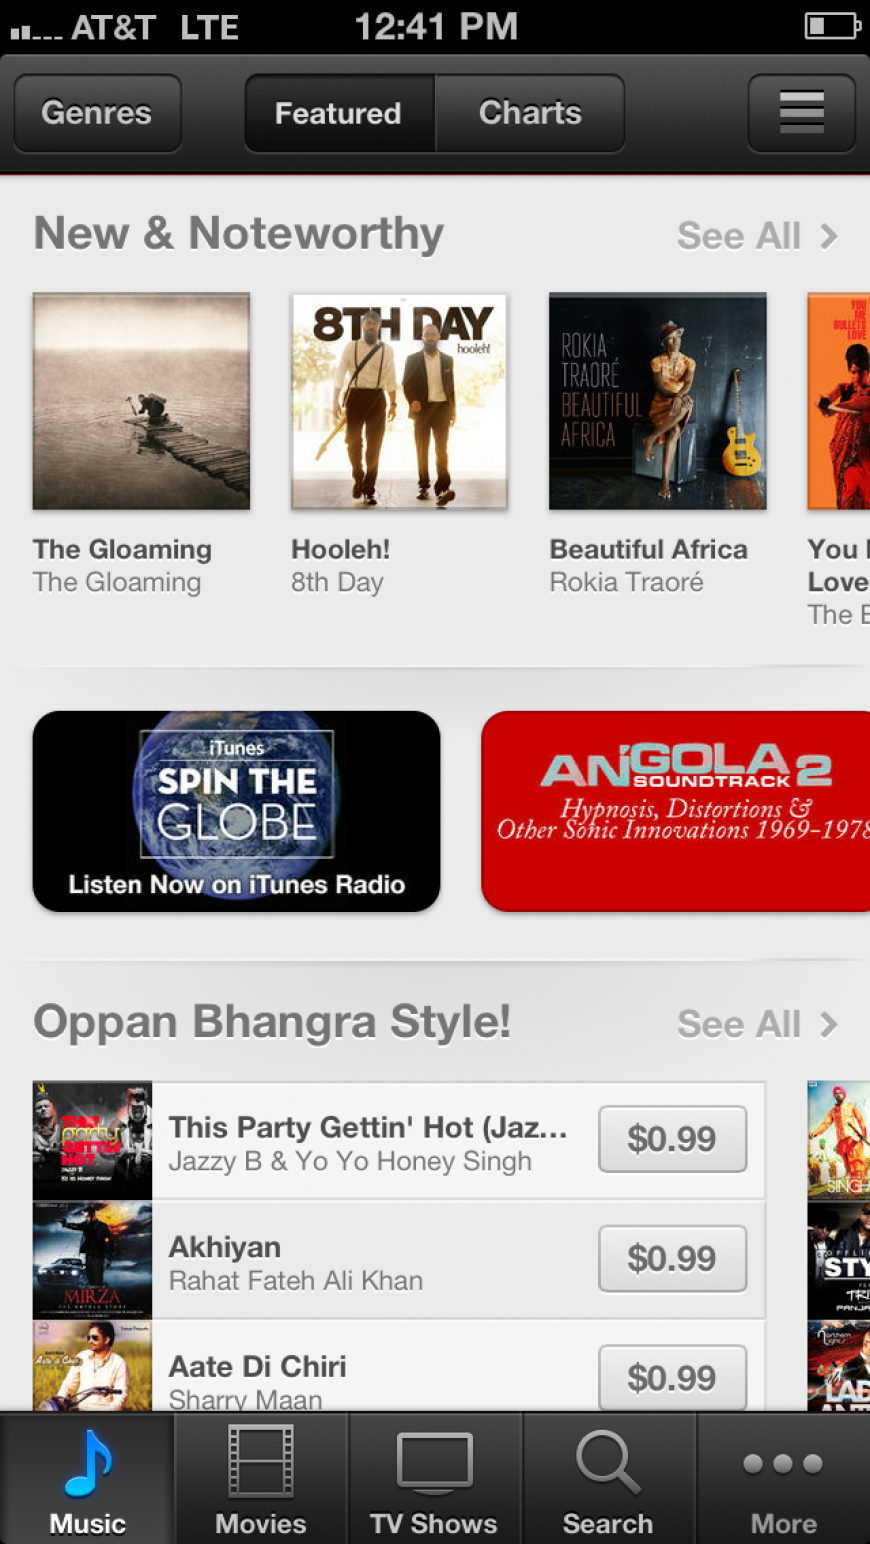 8th Day’s “Hooleh” Featured on iTunes World Music